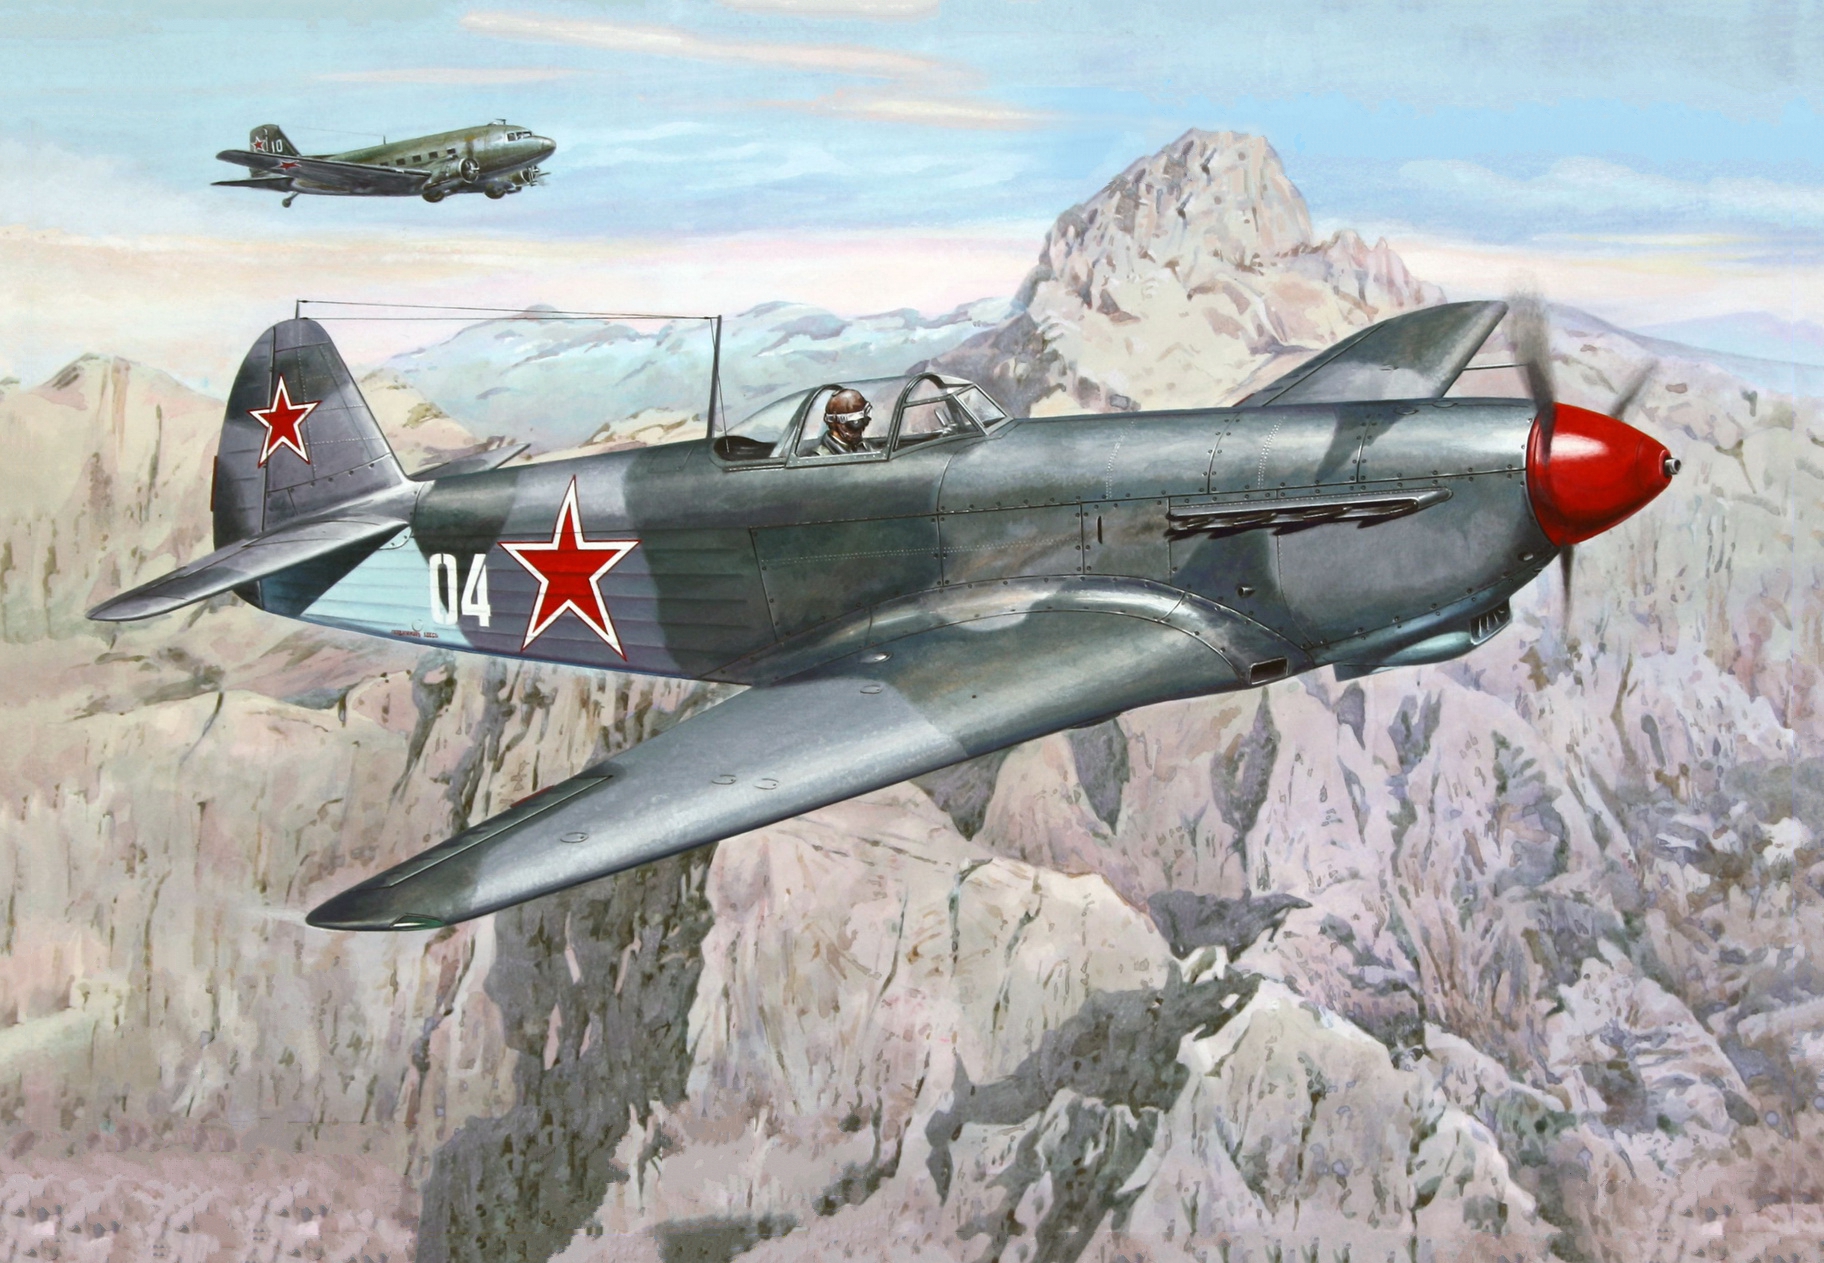 General 1824x1263 aircraft flying sky army gear military Russian/Soviet aircraft Yakovlev Yak-9 army pilot clouds men mountains